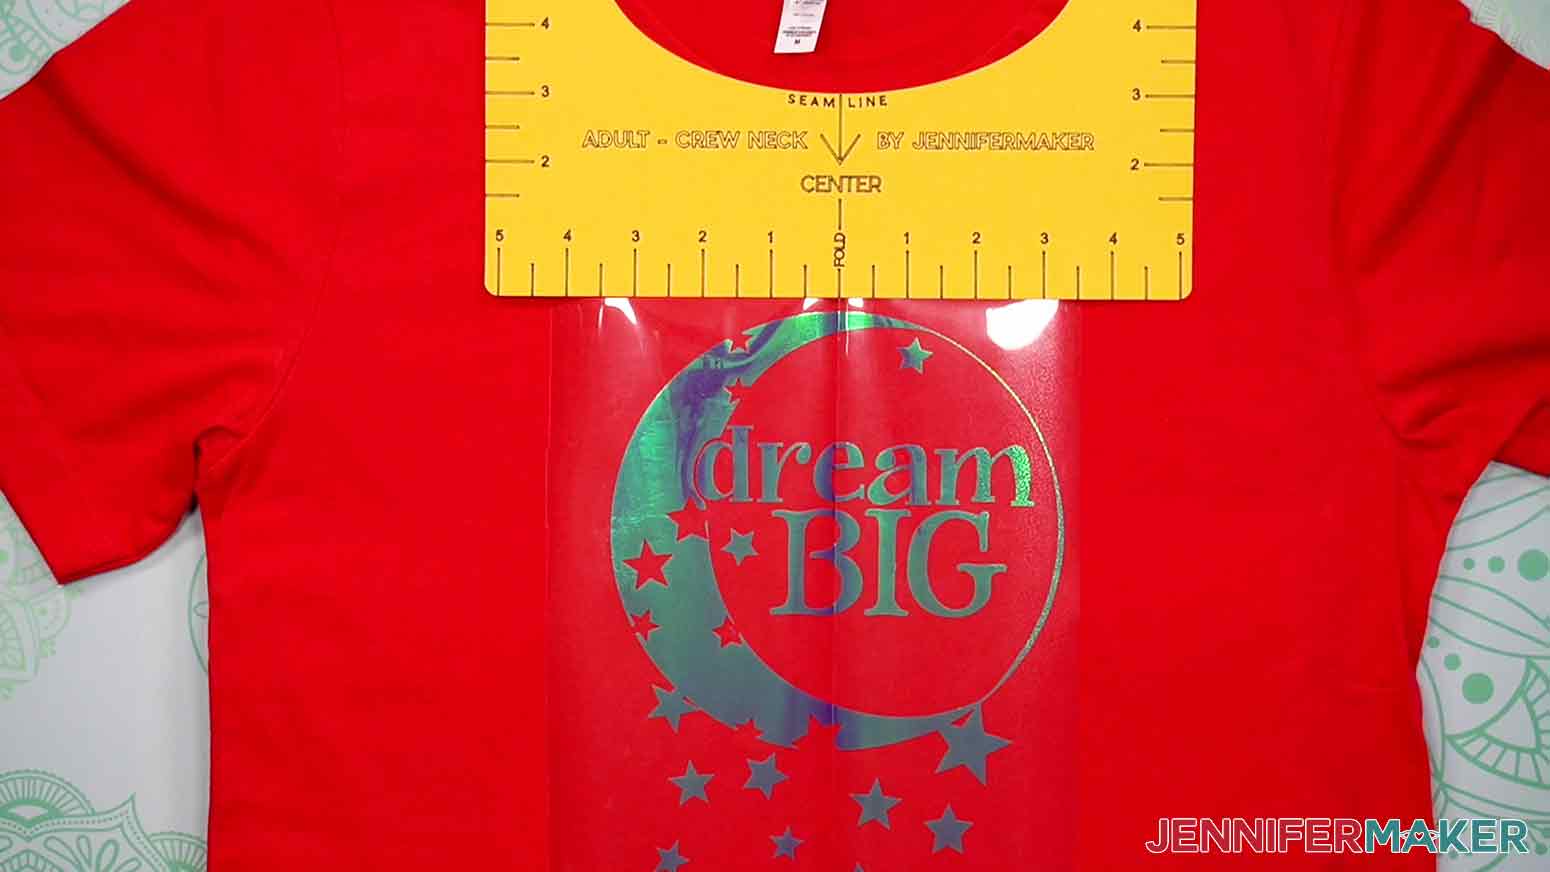 Place the Dream Big decal on the t-shirt and use the center fold of the decal, and the center fold of the t-shirt, along with the T-Shirt-Ruler to achieve the proper decal placement.